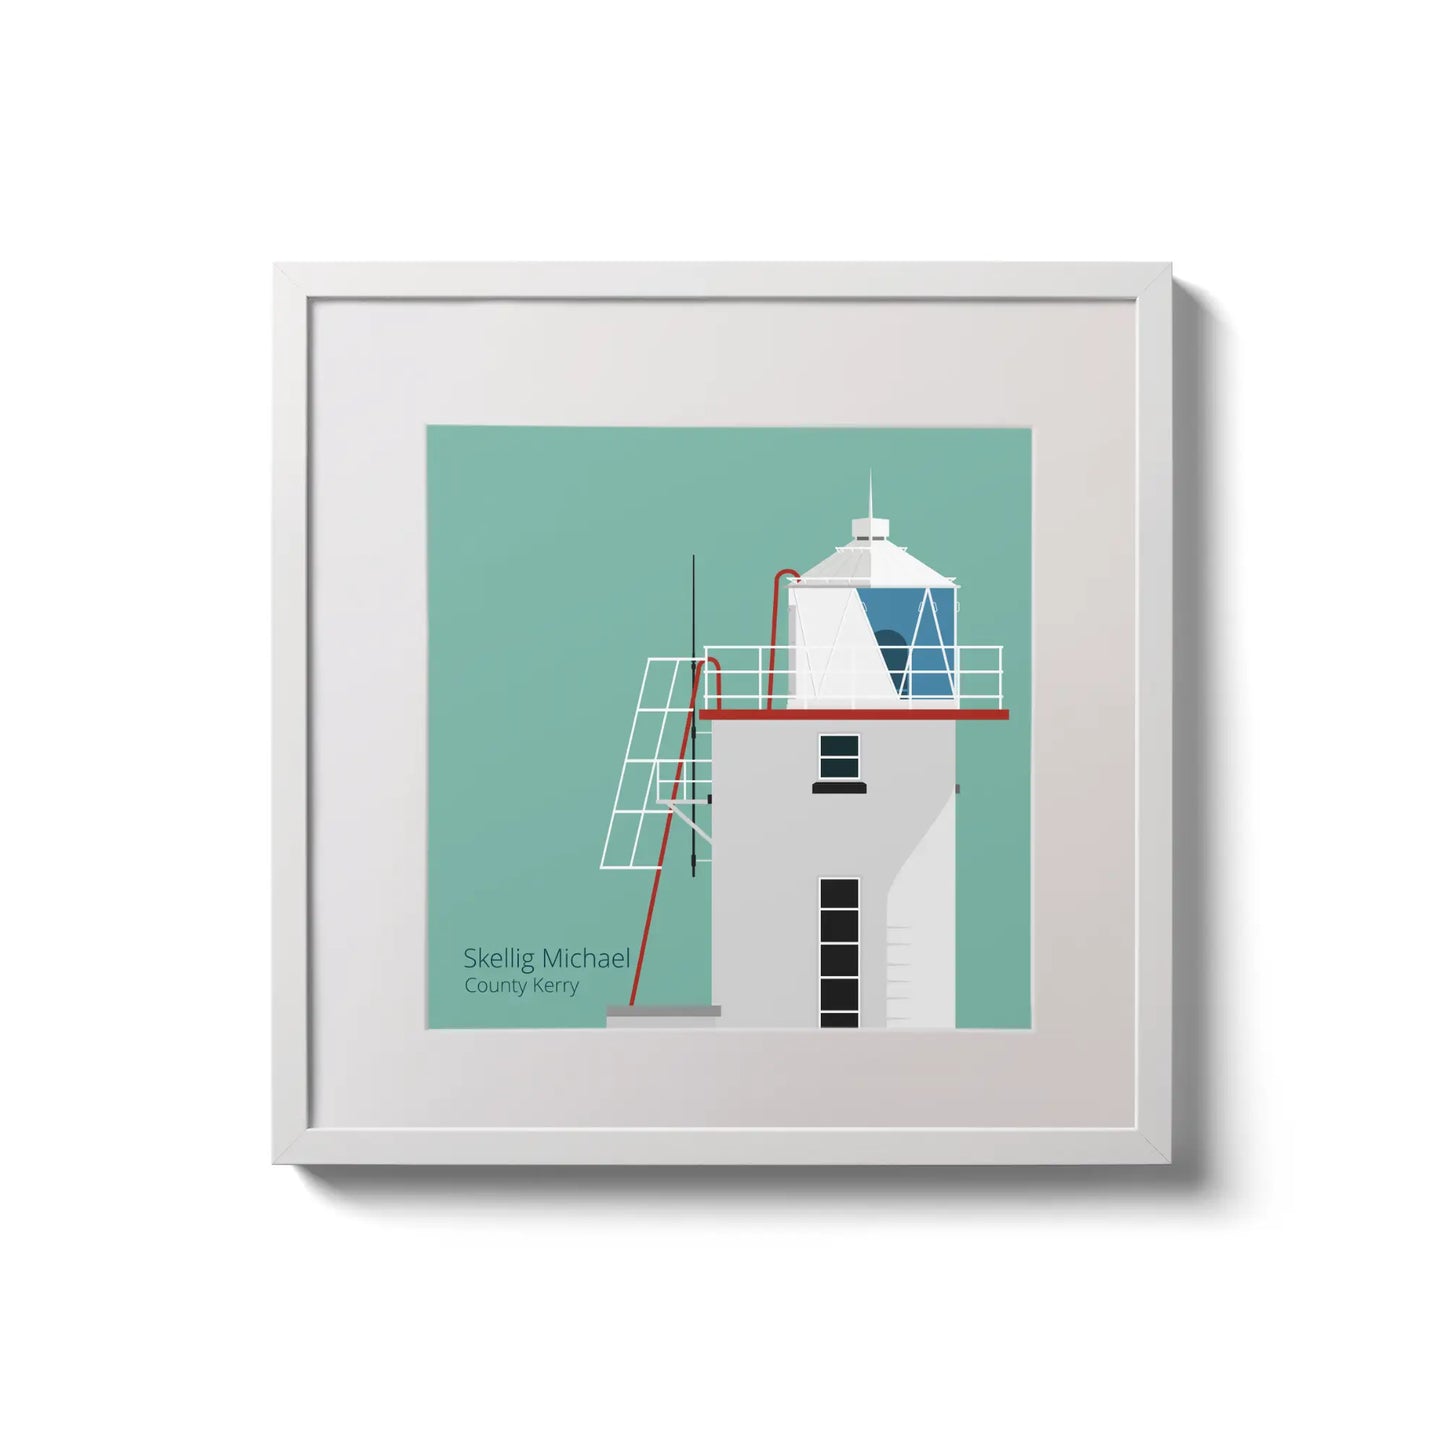 Illustration of Skellig Michael lighthouse on an ocean green background,  in a white square frame measuring 20x20cm.